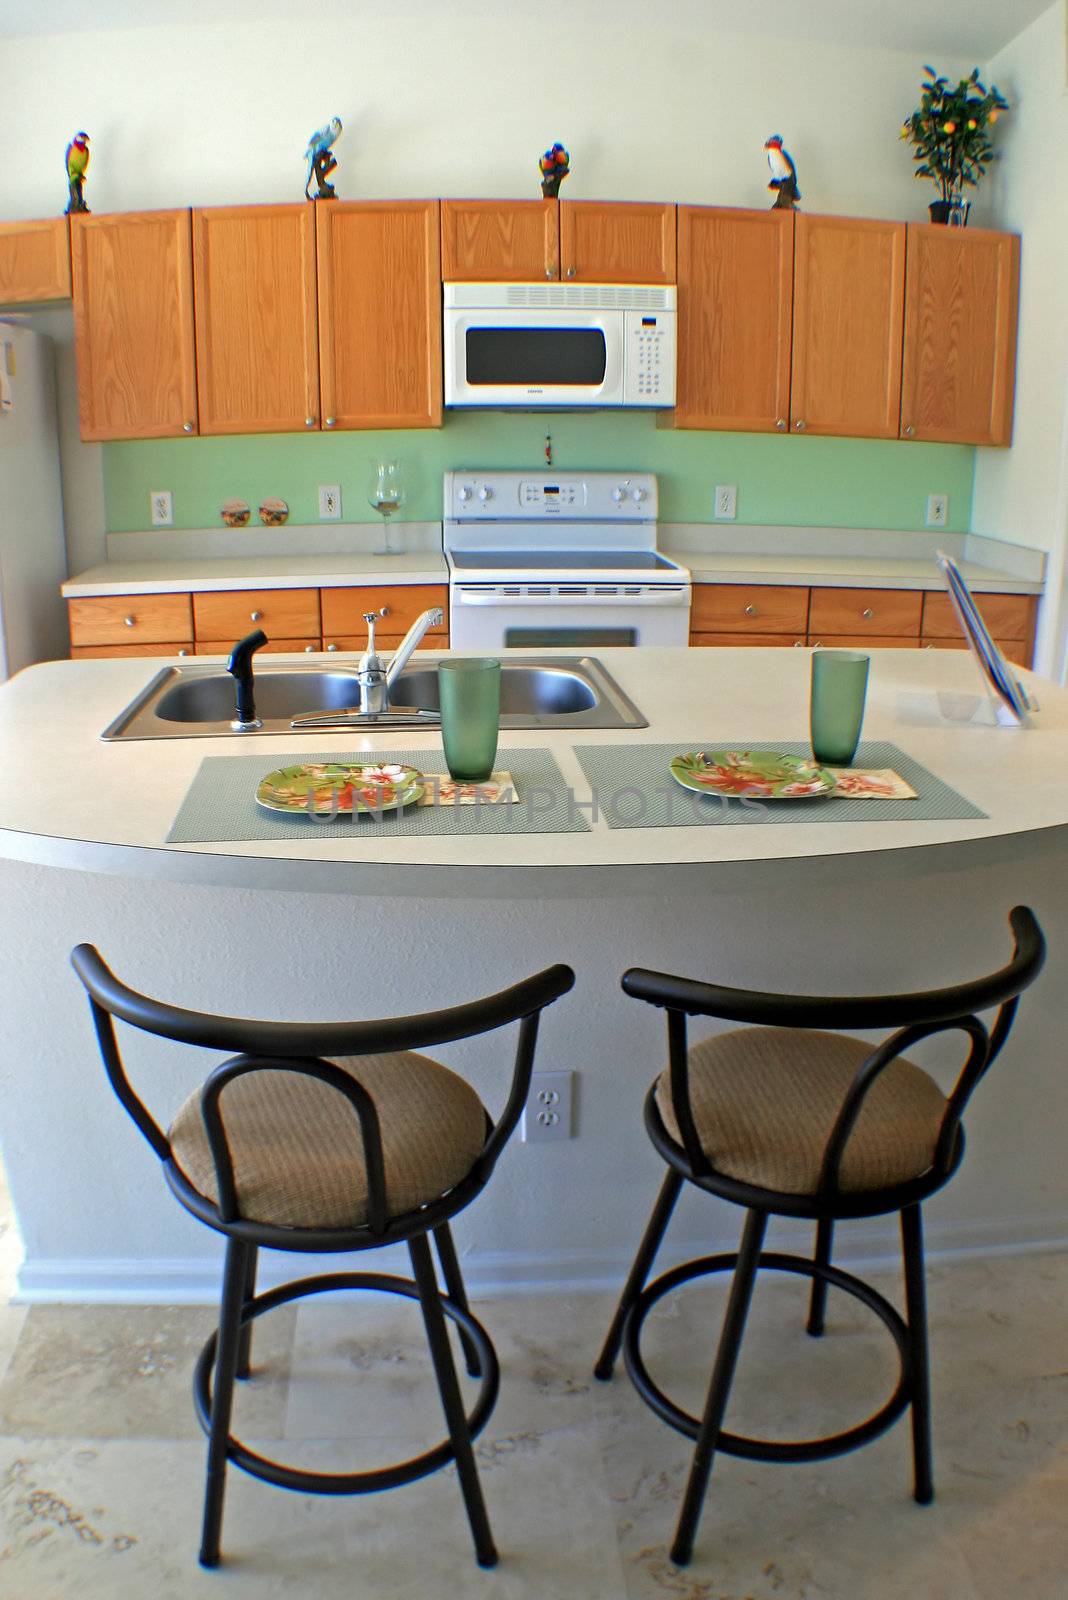 Kitchen with Bar Stools by quackersnaps